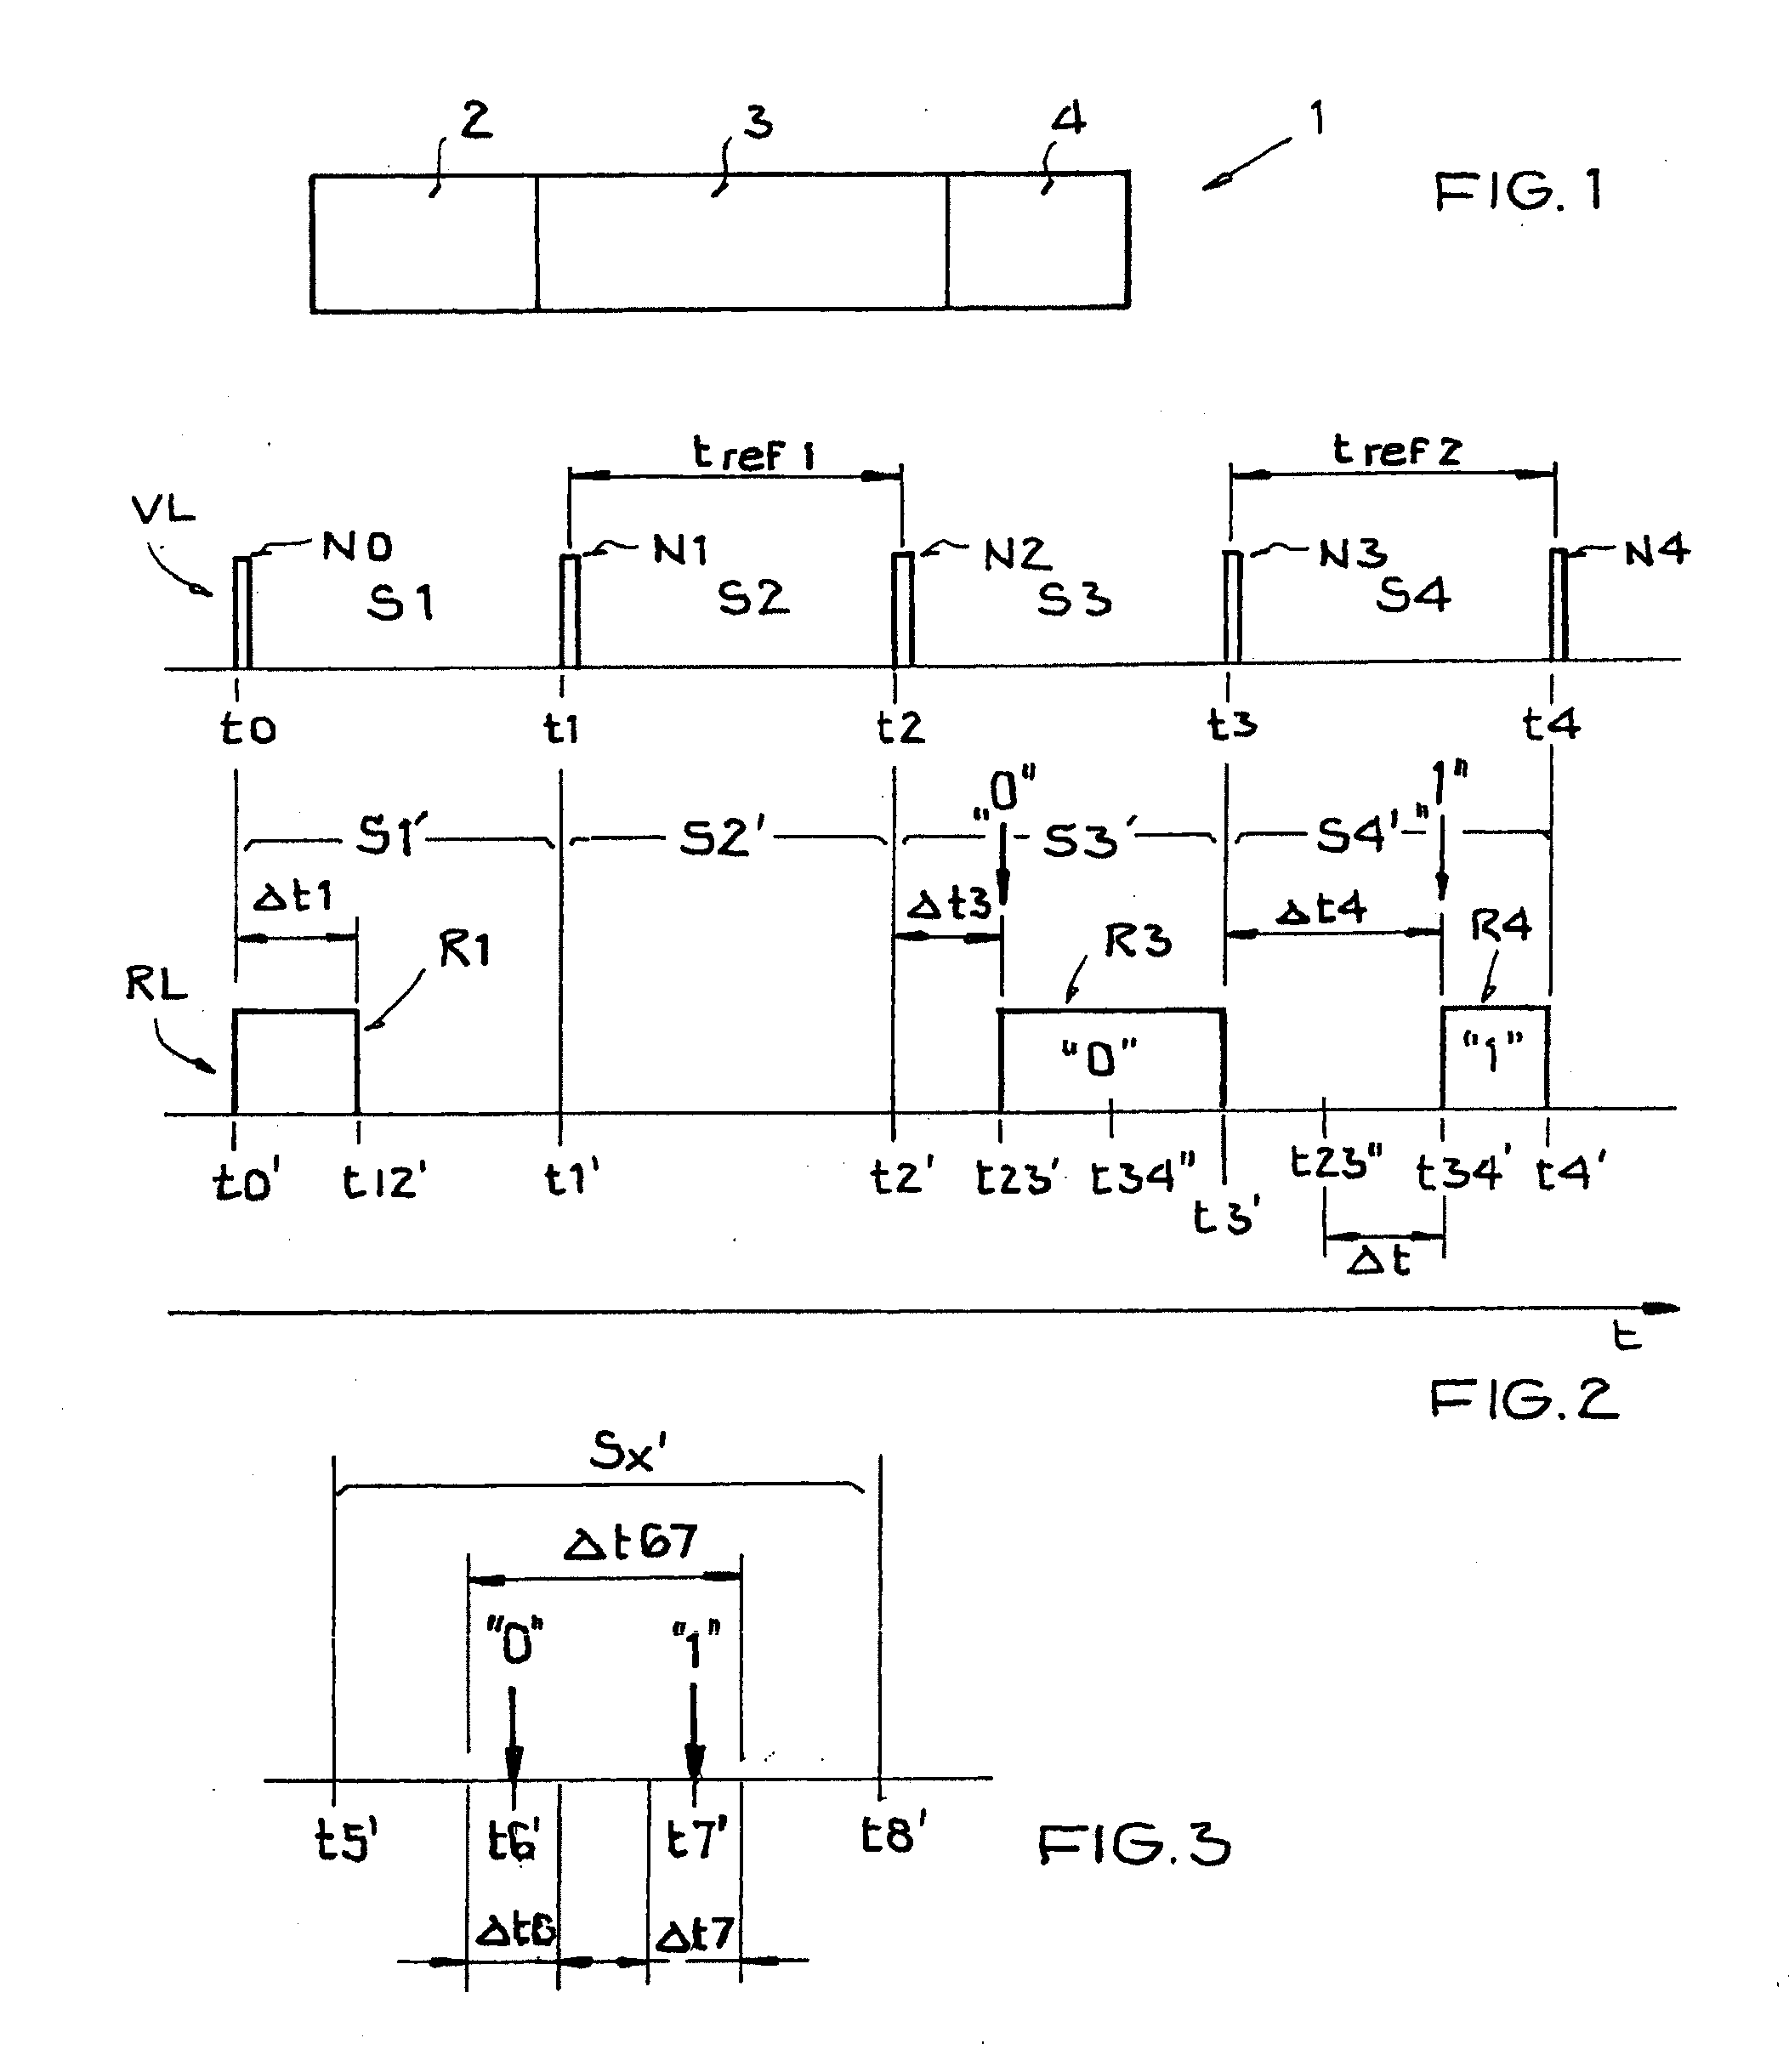 Method and Apparatus for Data Communication Between a Base Station and a Transponder